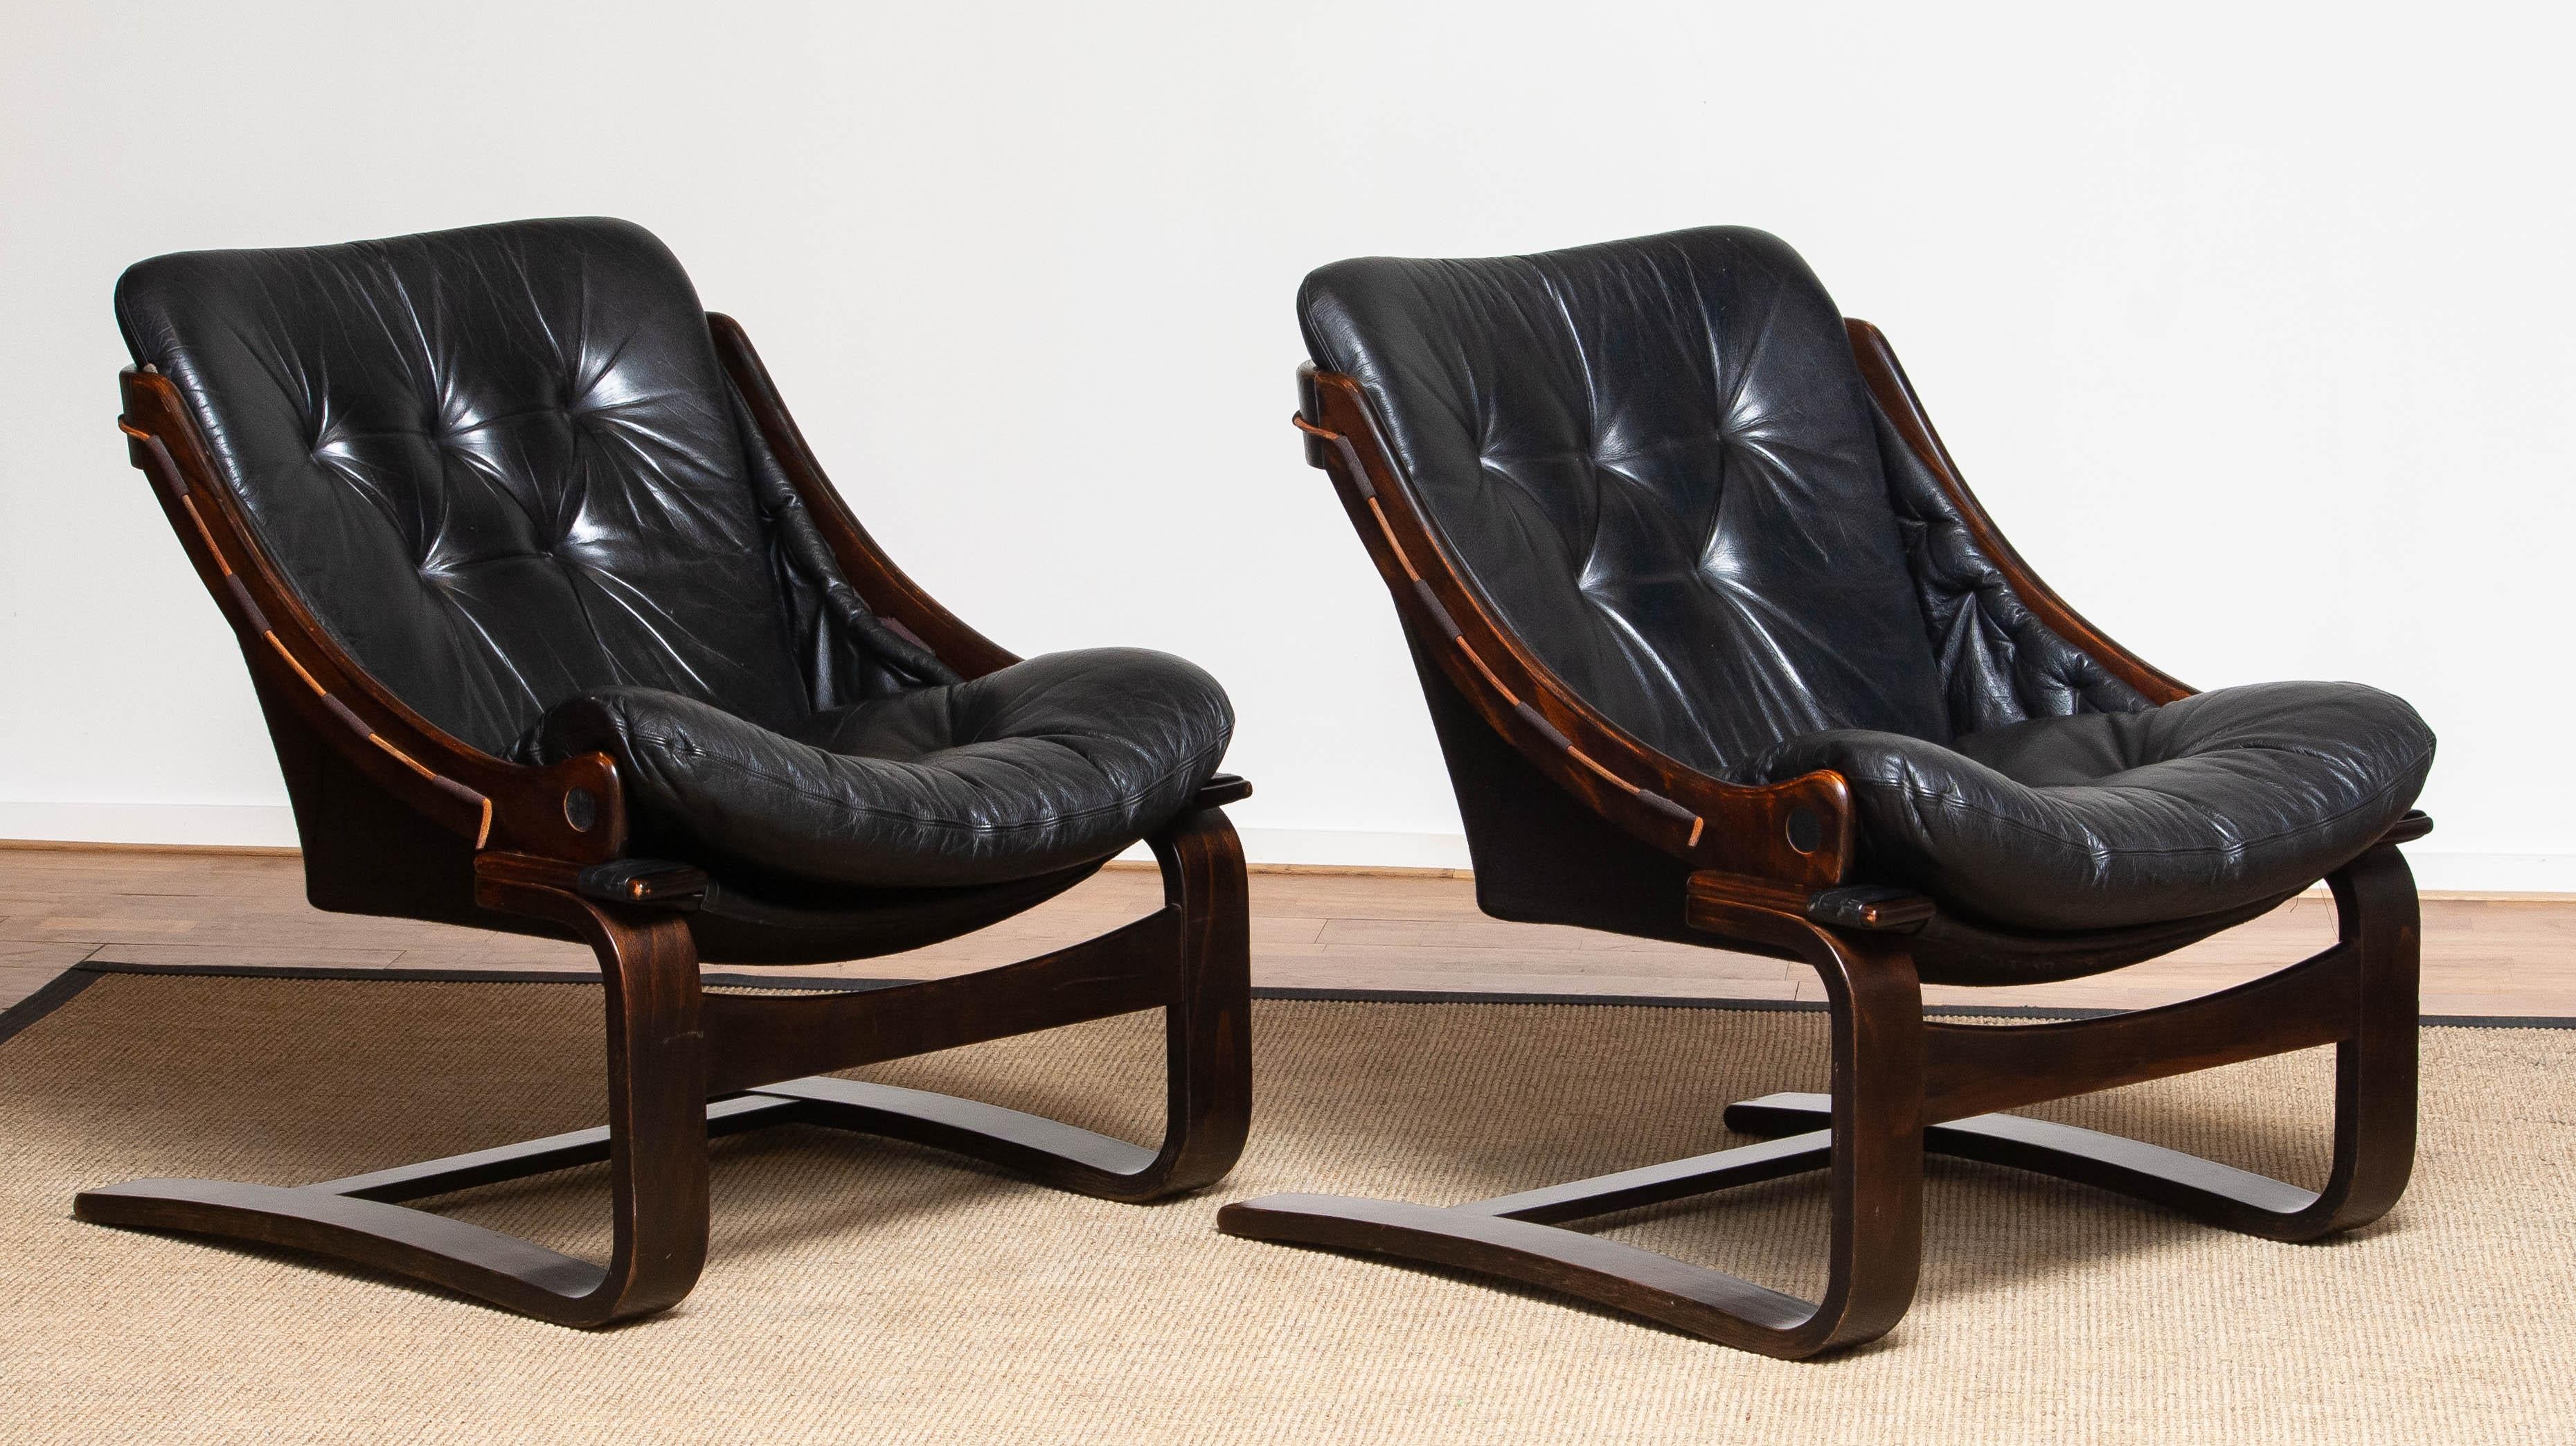 1970's Pair Black Leather Club / Lounge Chairs by Ake Fribytter for Nelo Sweden 3